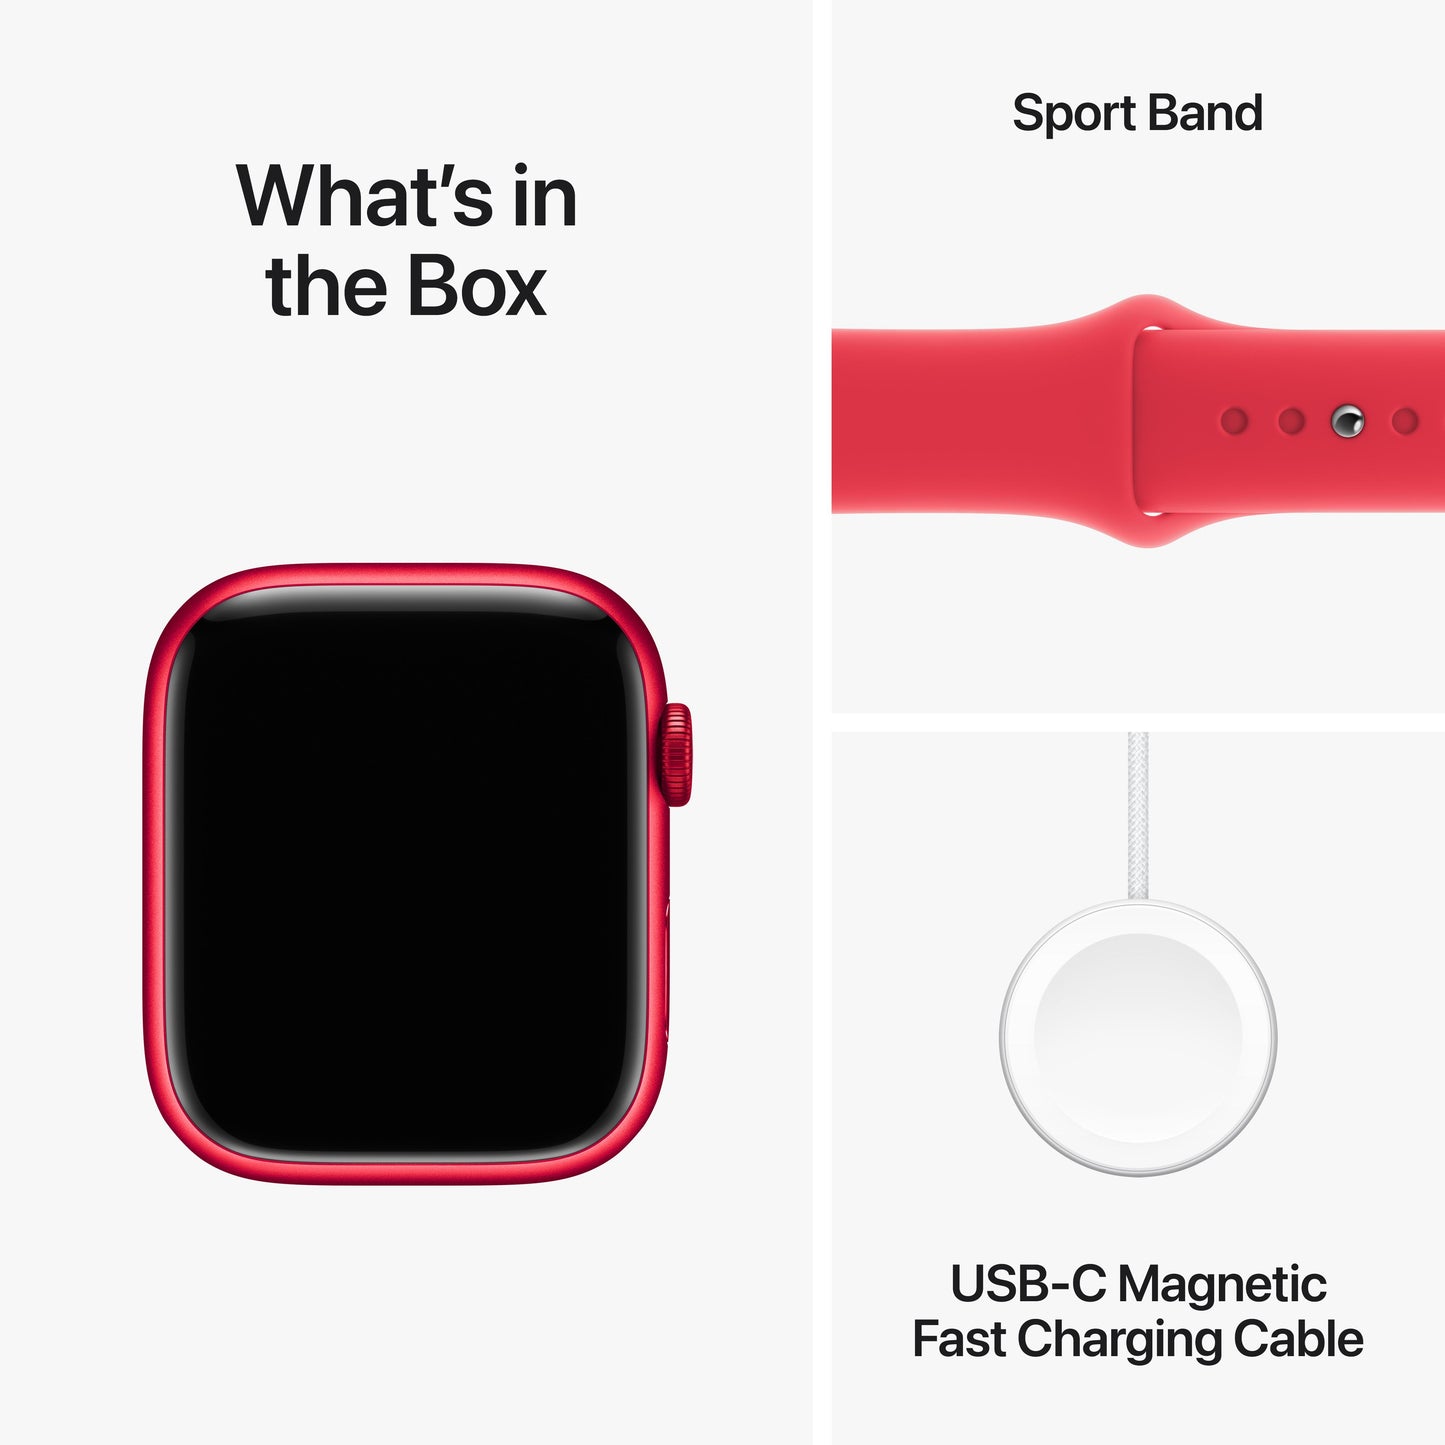 Apple Watch Series 9 GPS 45mm (PRODUCT)RED Aluminum Case with (PRODUCT)RED Sport Band - M/L